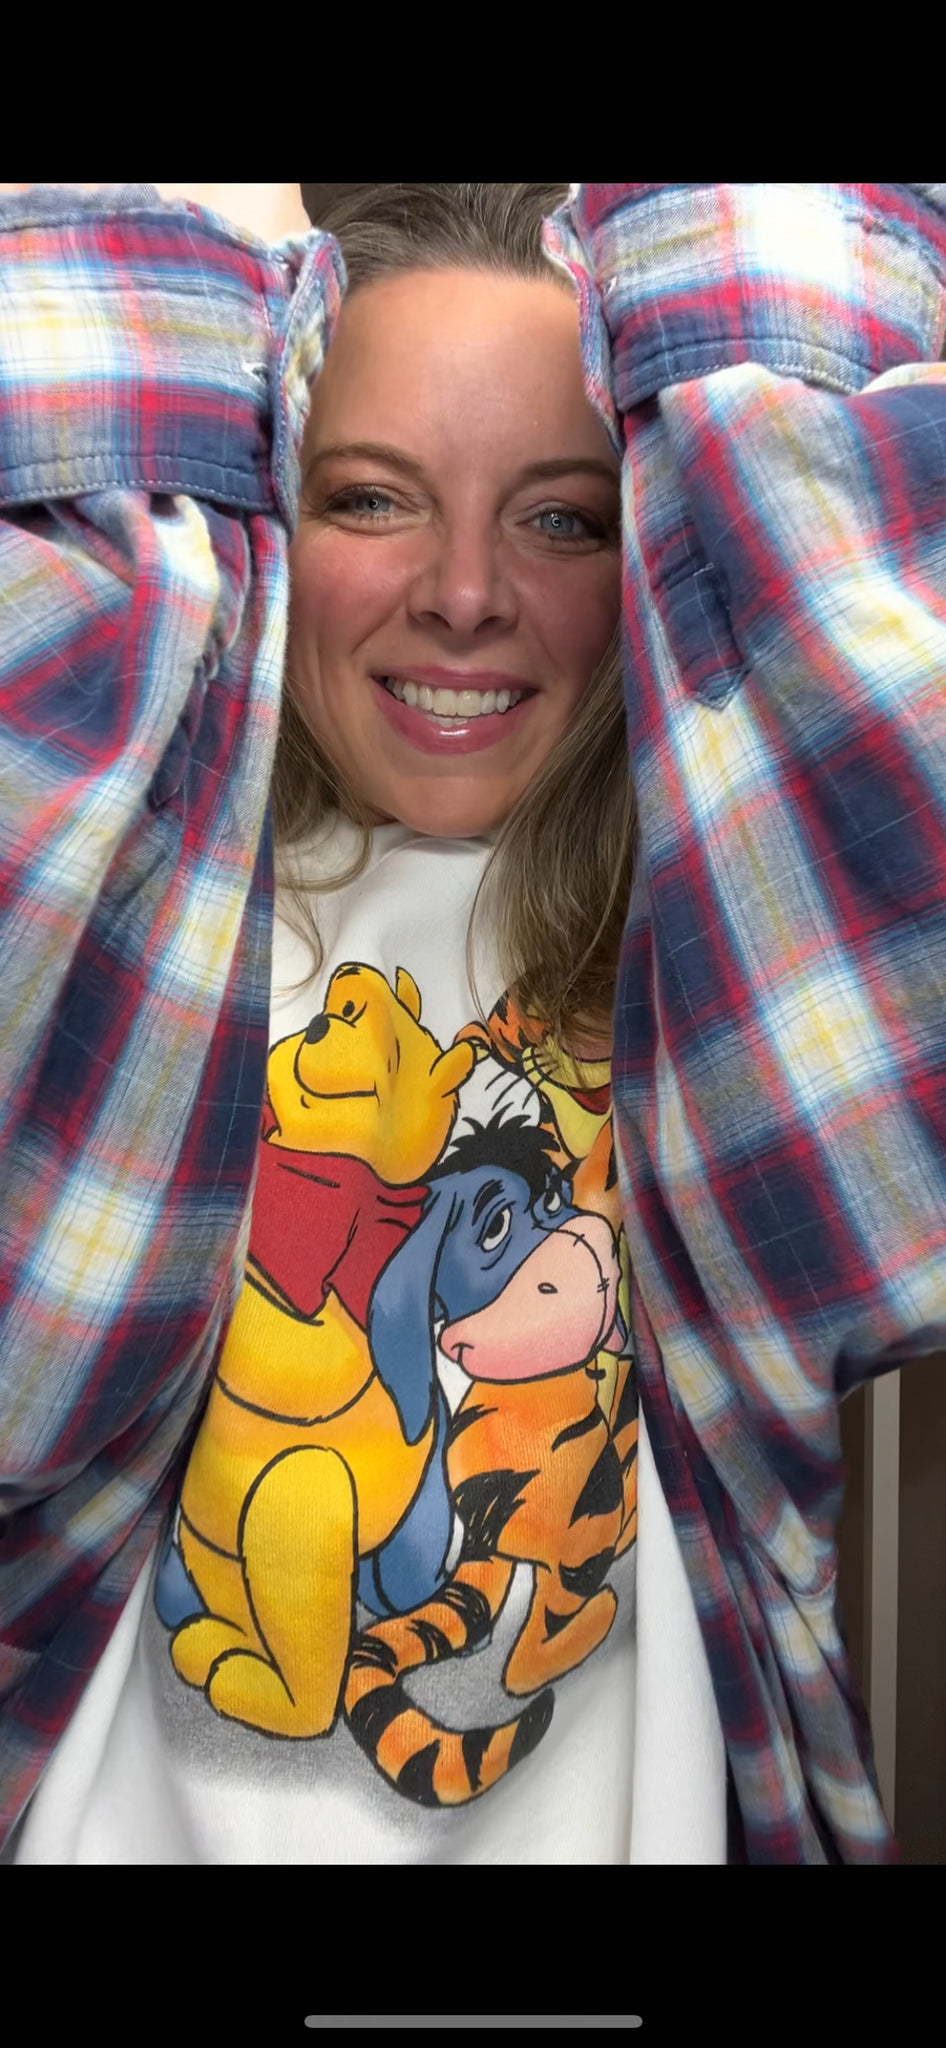 Winnie the Pooh - woman’s 1X - some faint stains- see pics